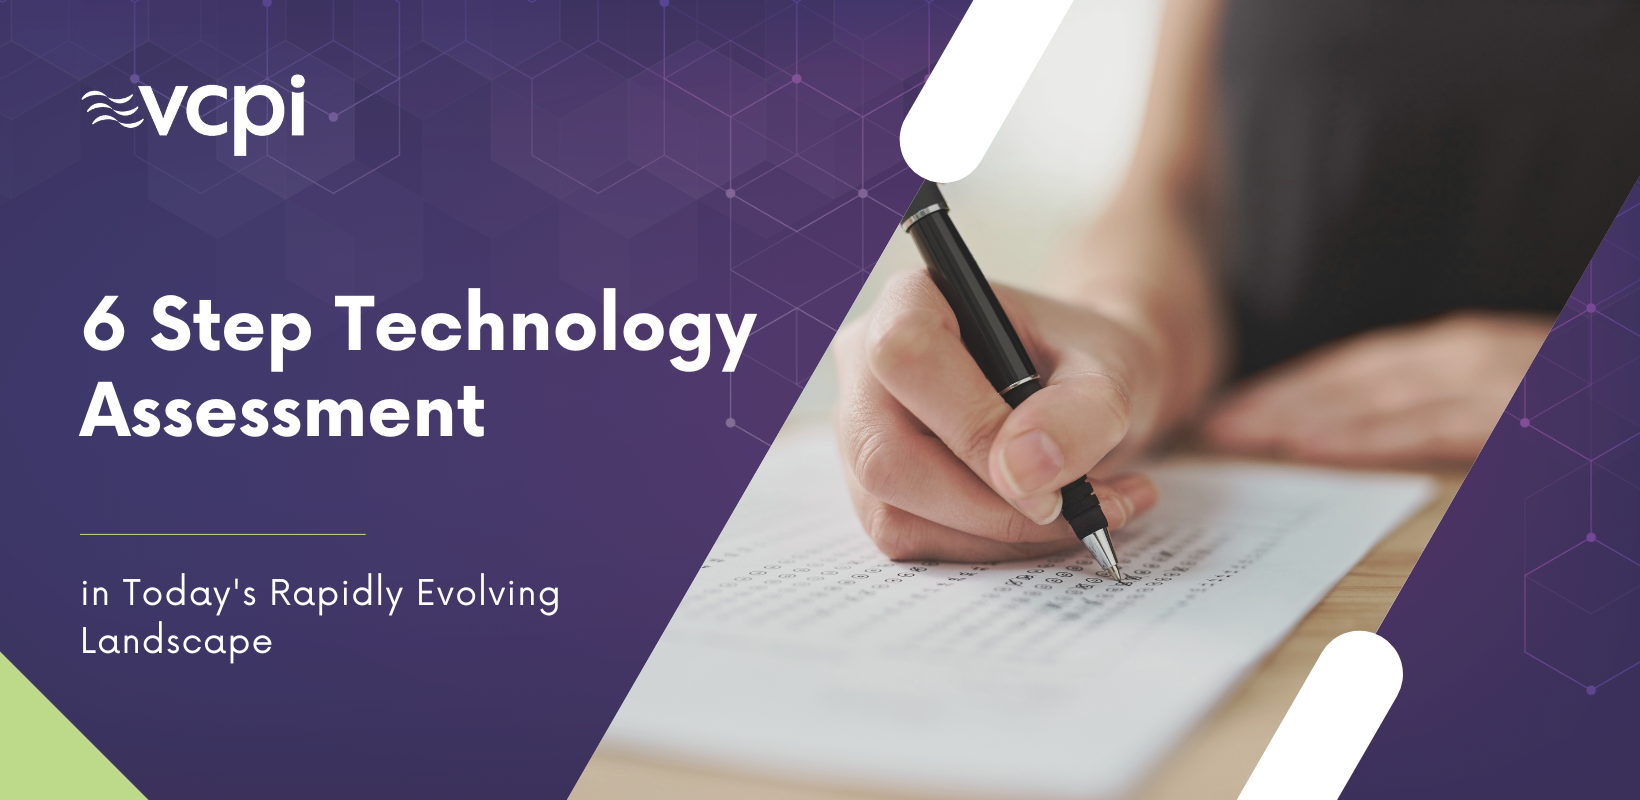 Technology Assessment in Today's Rapidly Evolving Landscape